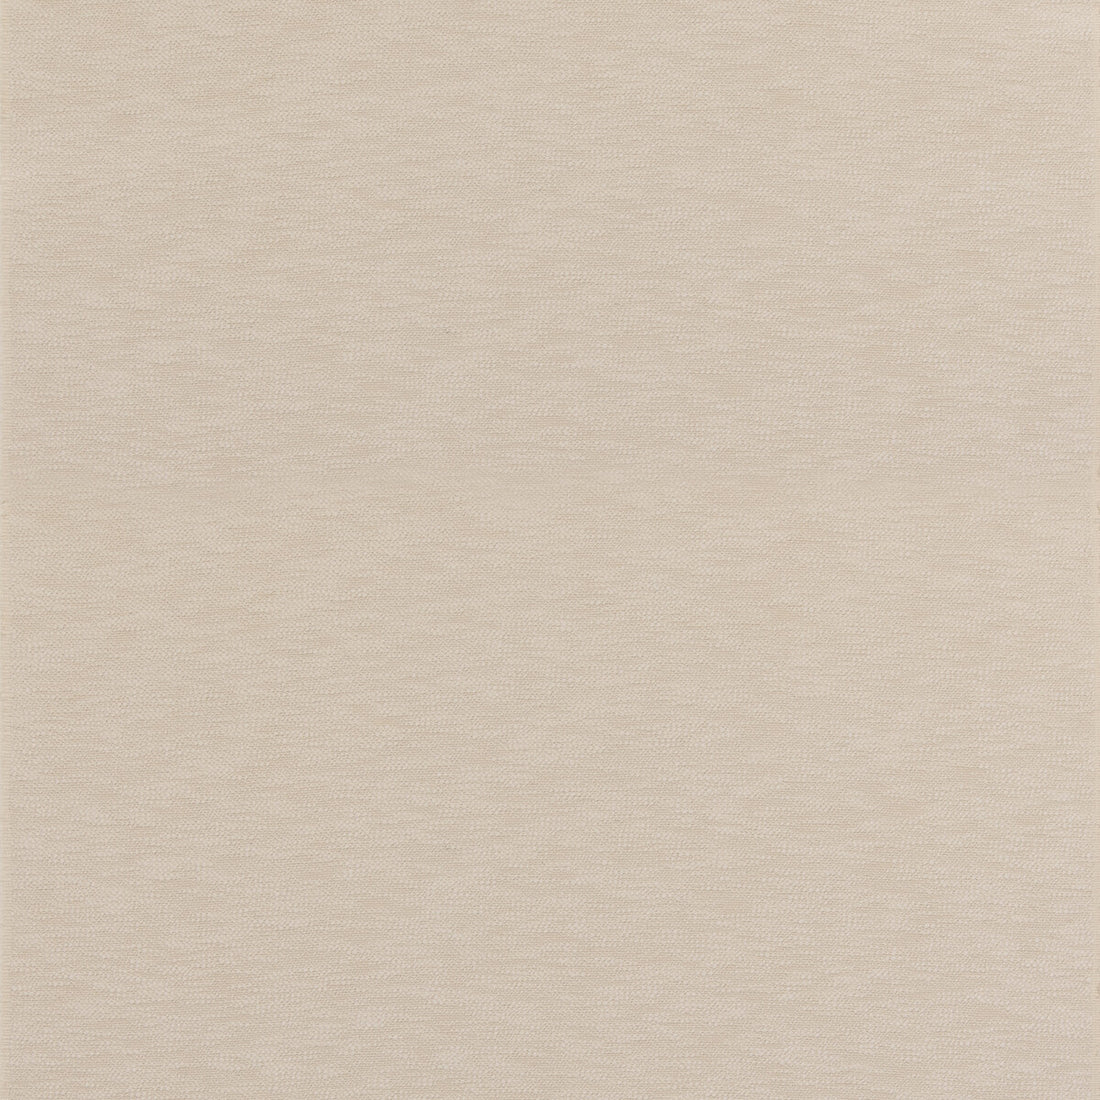 Osaka fabric in ivory color - pattern ED85378.104.0 - by Threads in the Quintessential Textures collection